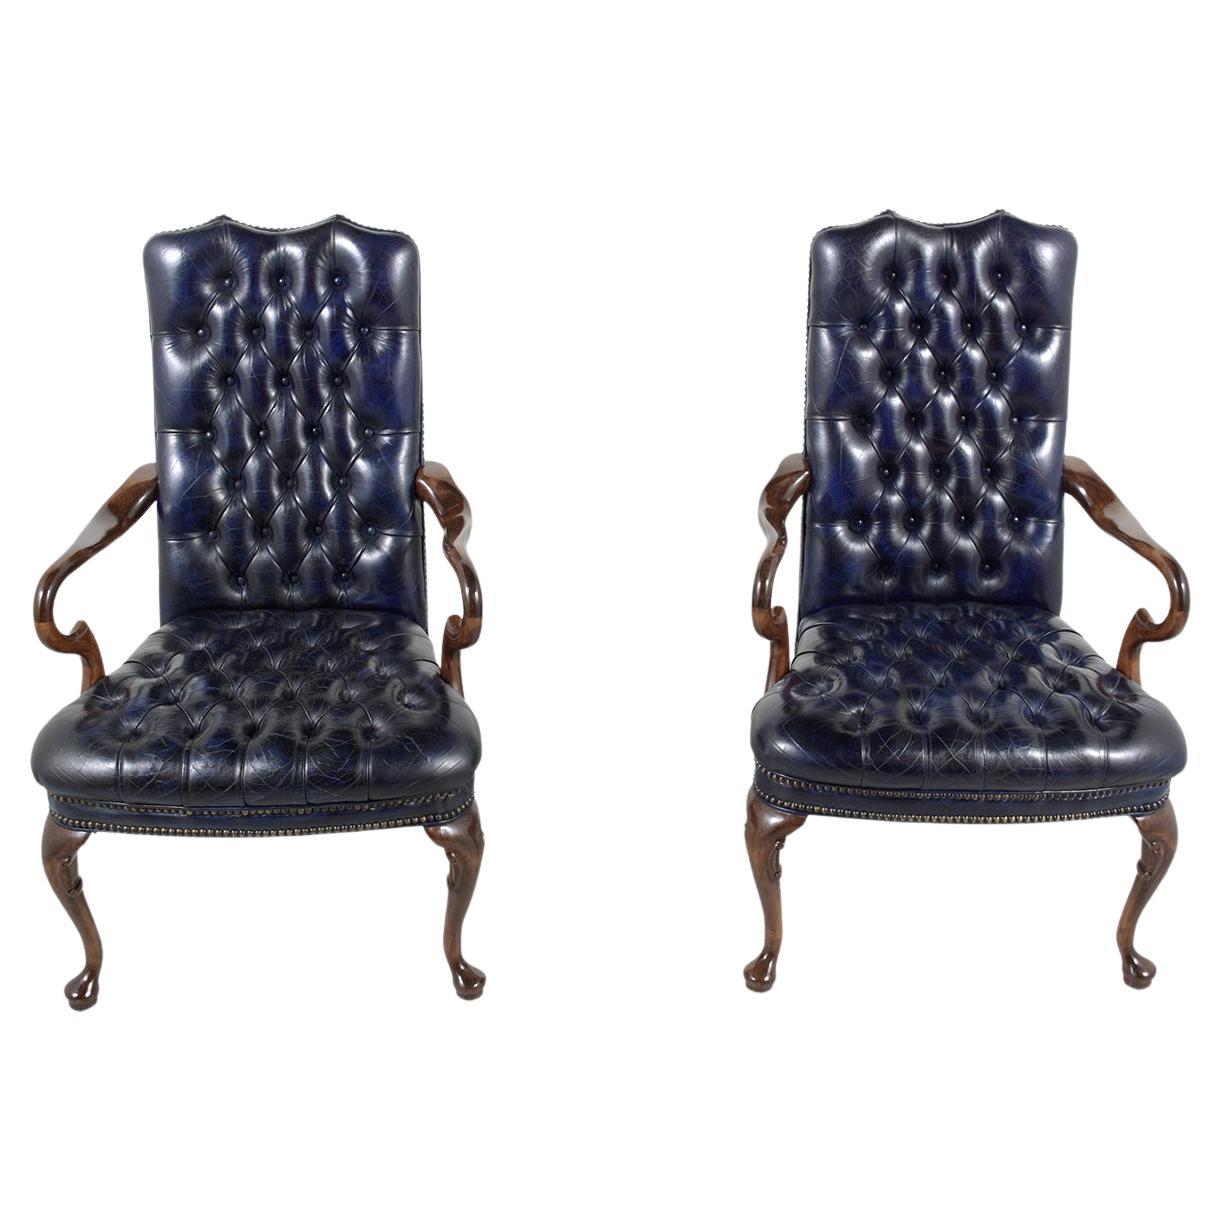 Pair of Chesterfield Tufted Leather Chairs